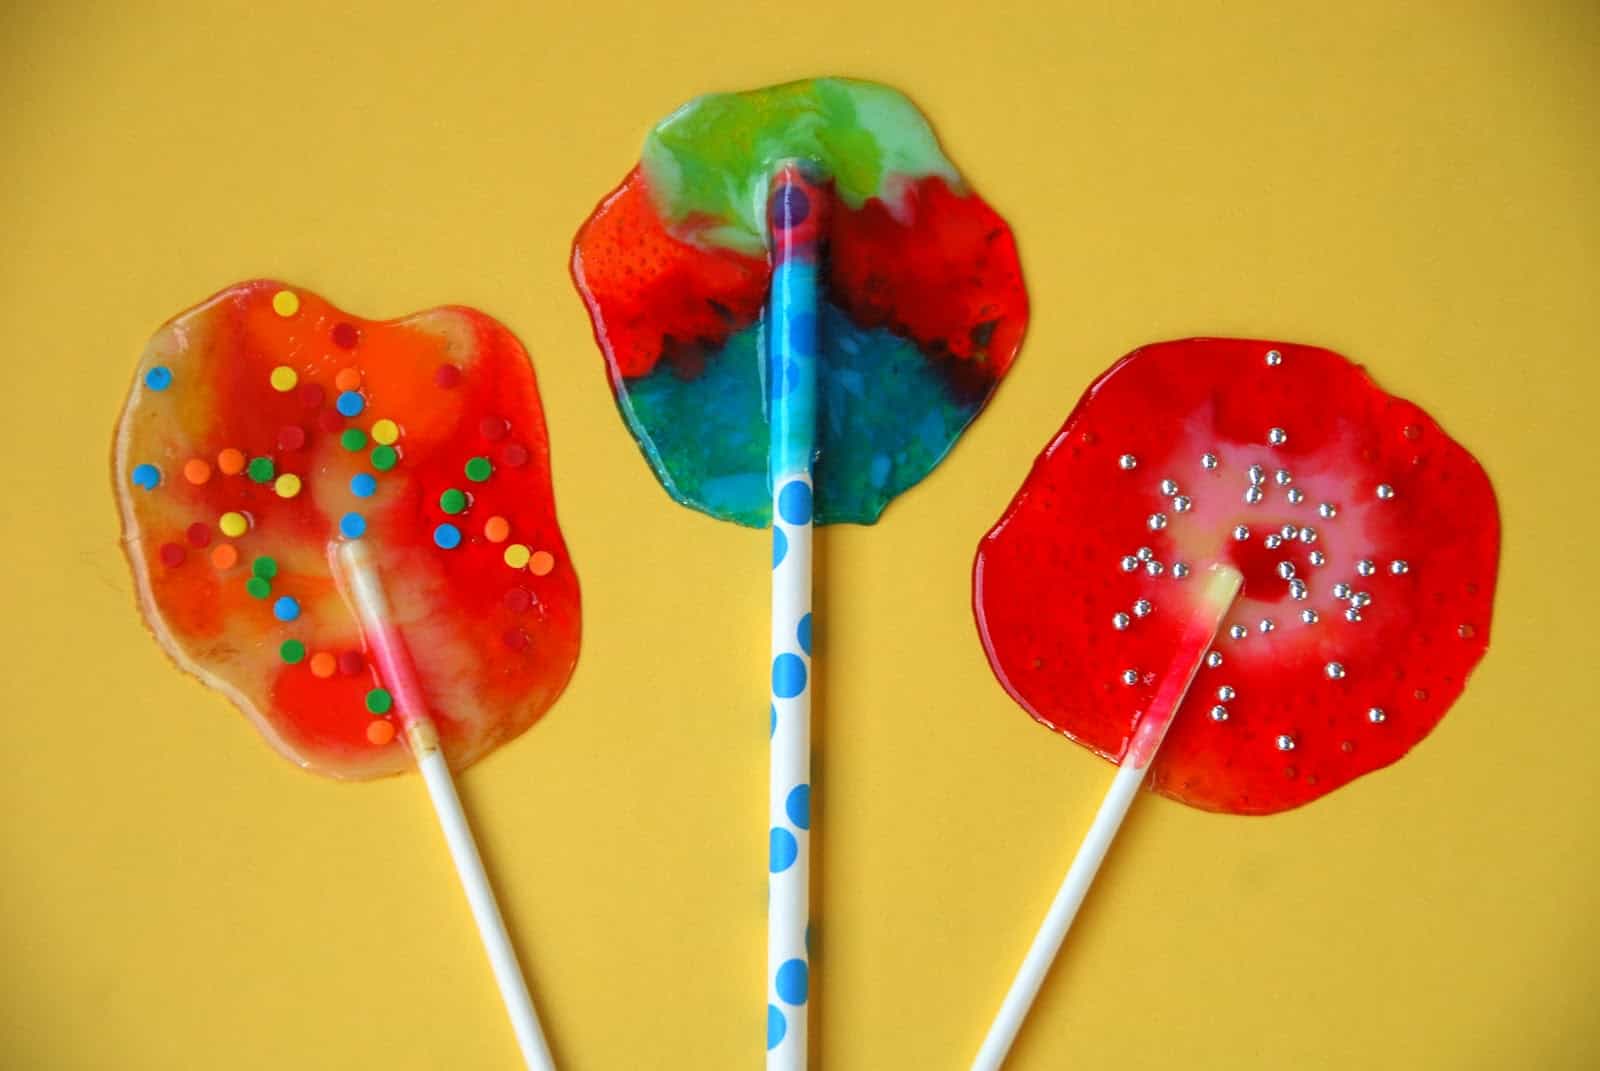 Melted candy lollipops with sprinkles